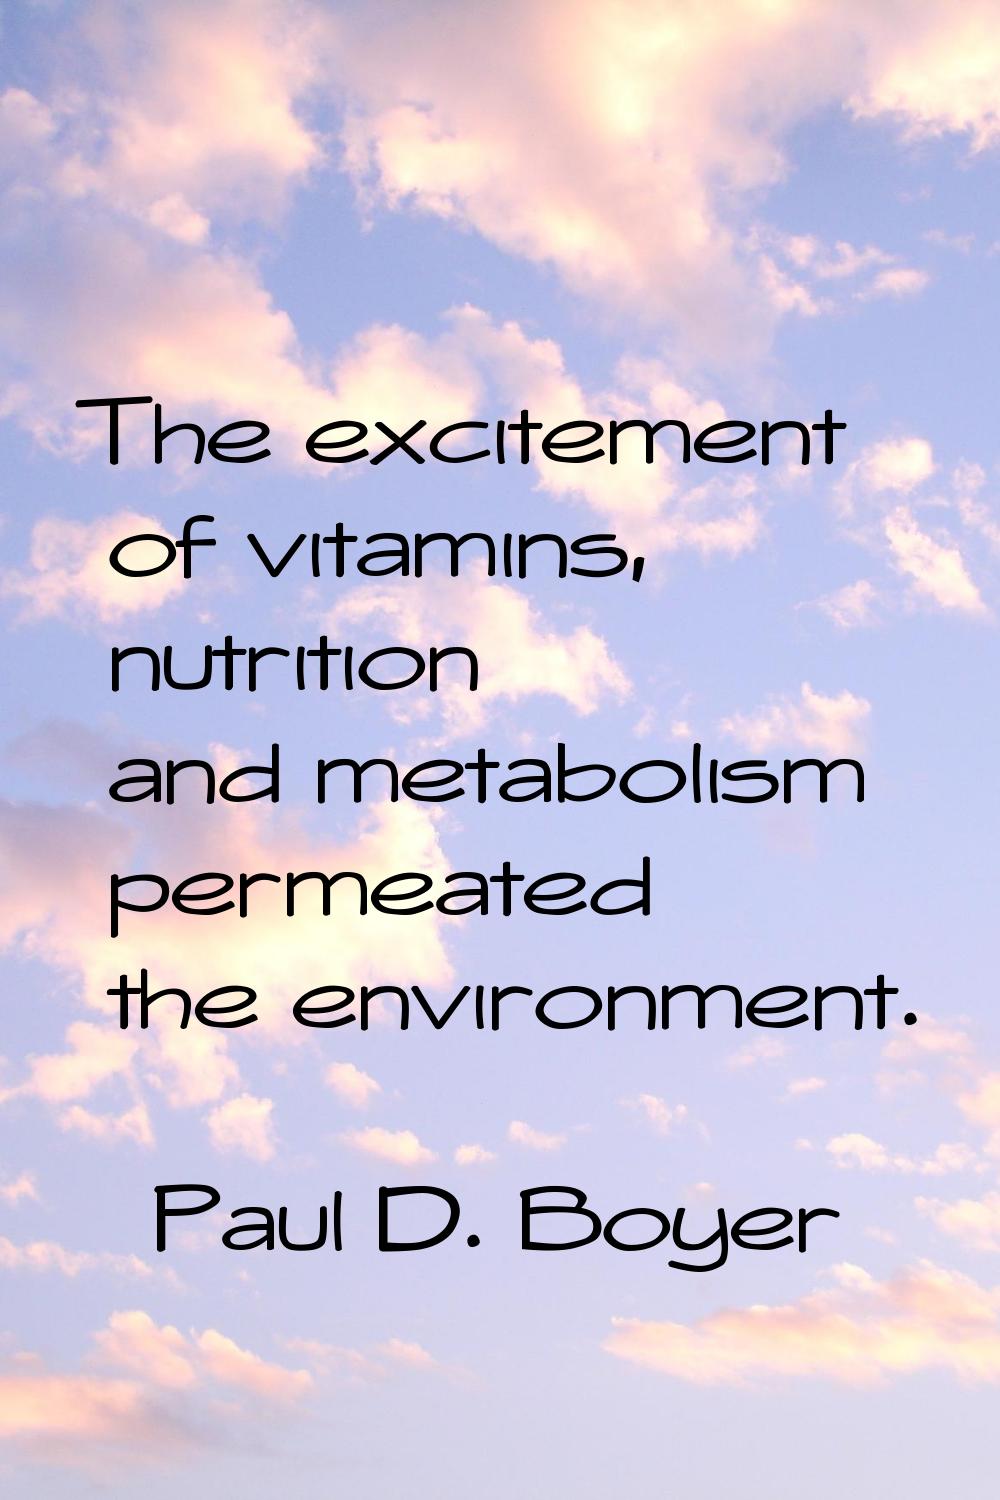 The excitement of vitamins, nutrition and metabolism permeated the environment.